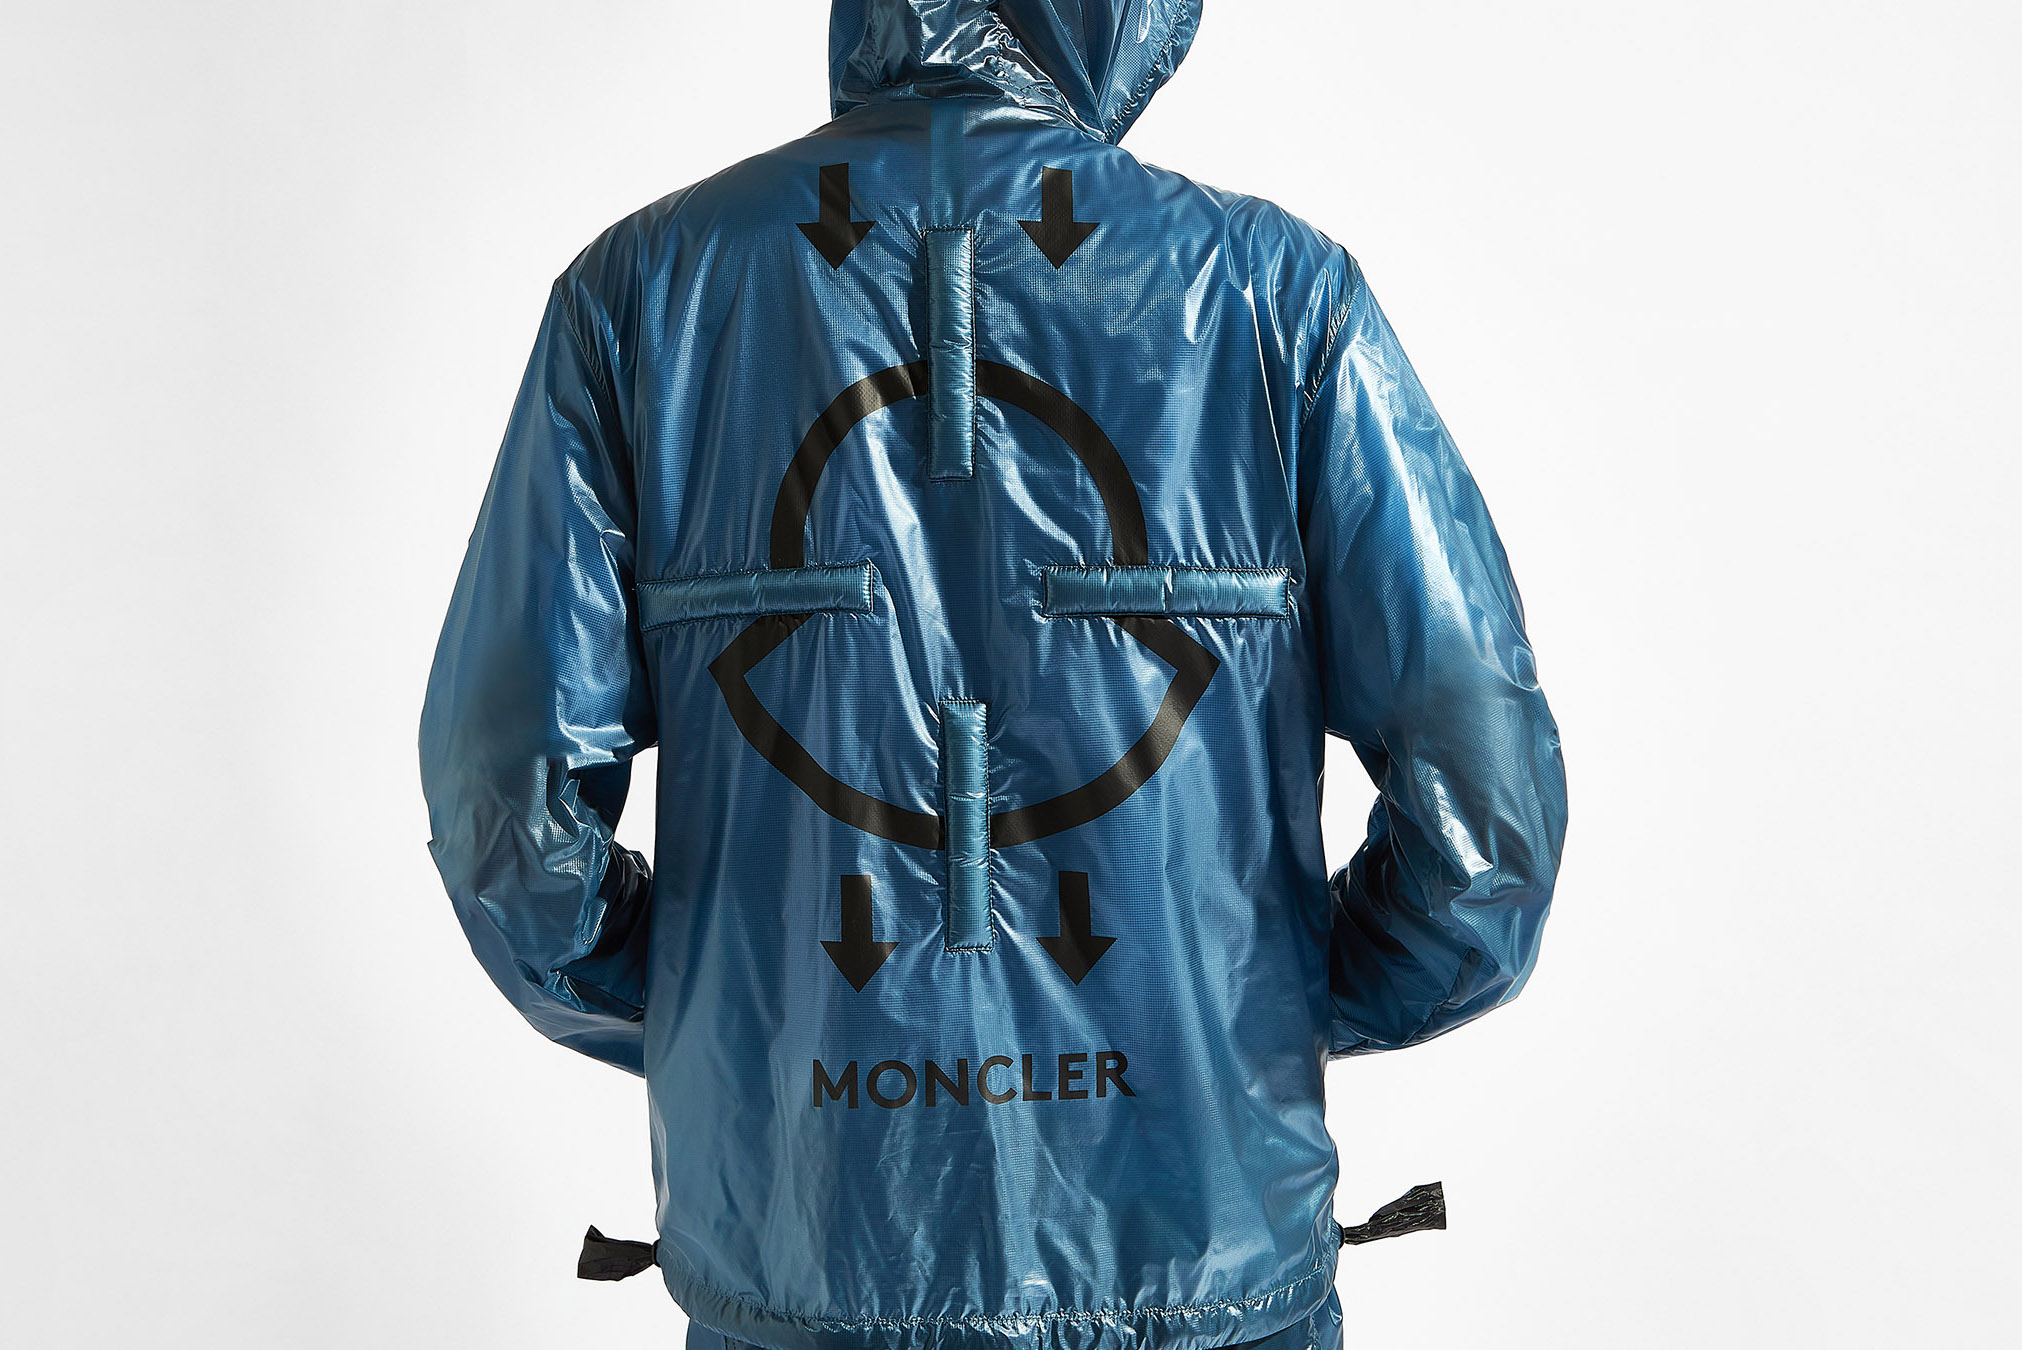 Moncler Genius - 5 Craig Green - Register Now on END. Launches